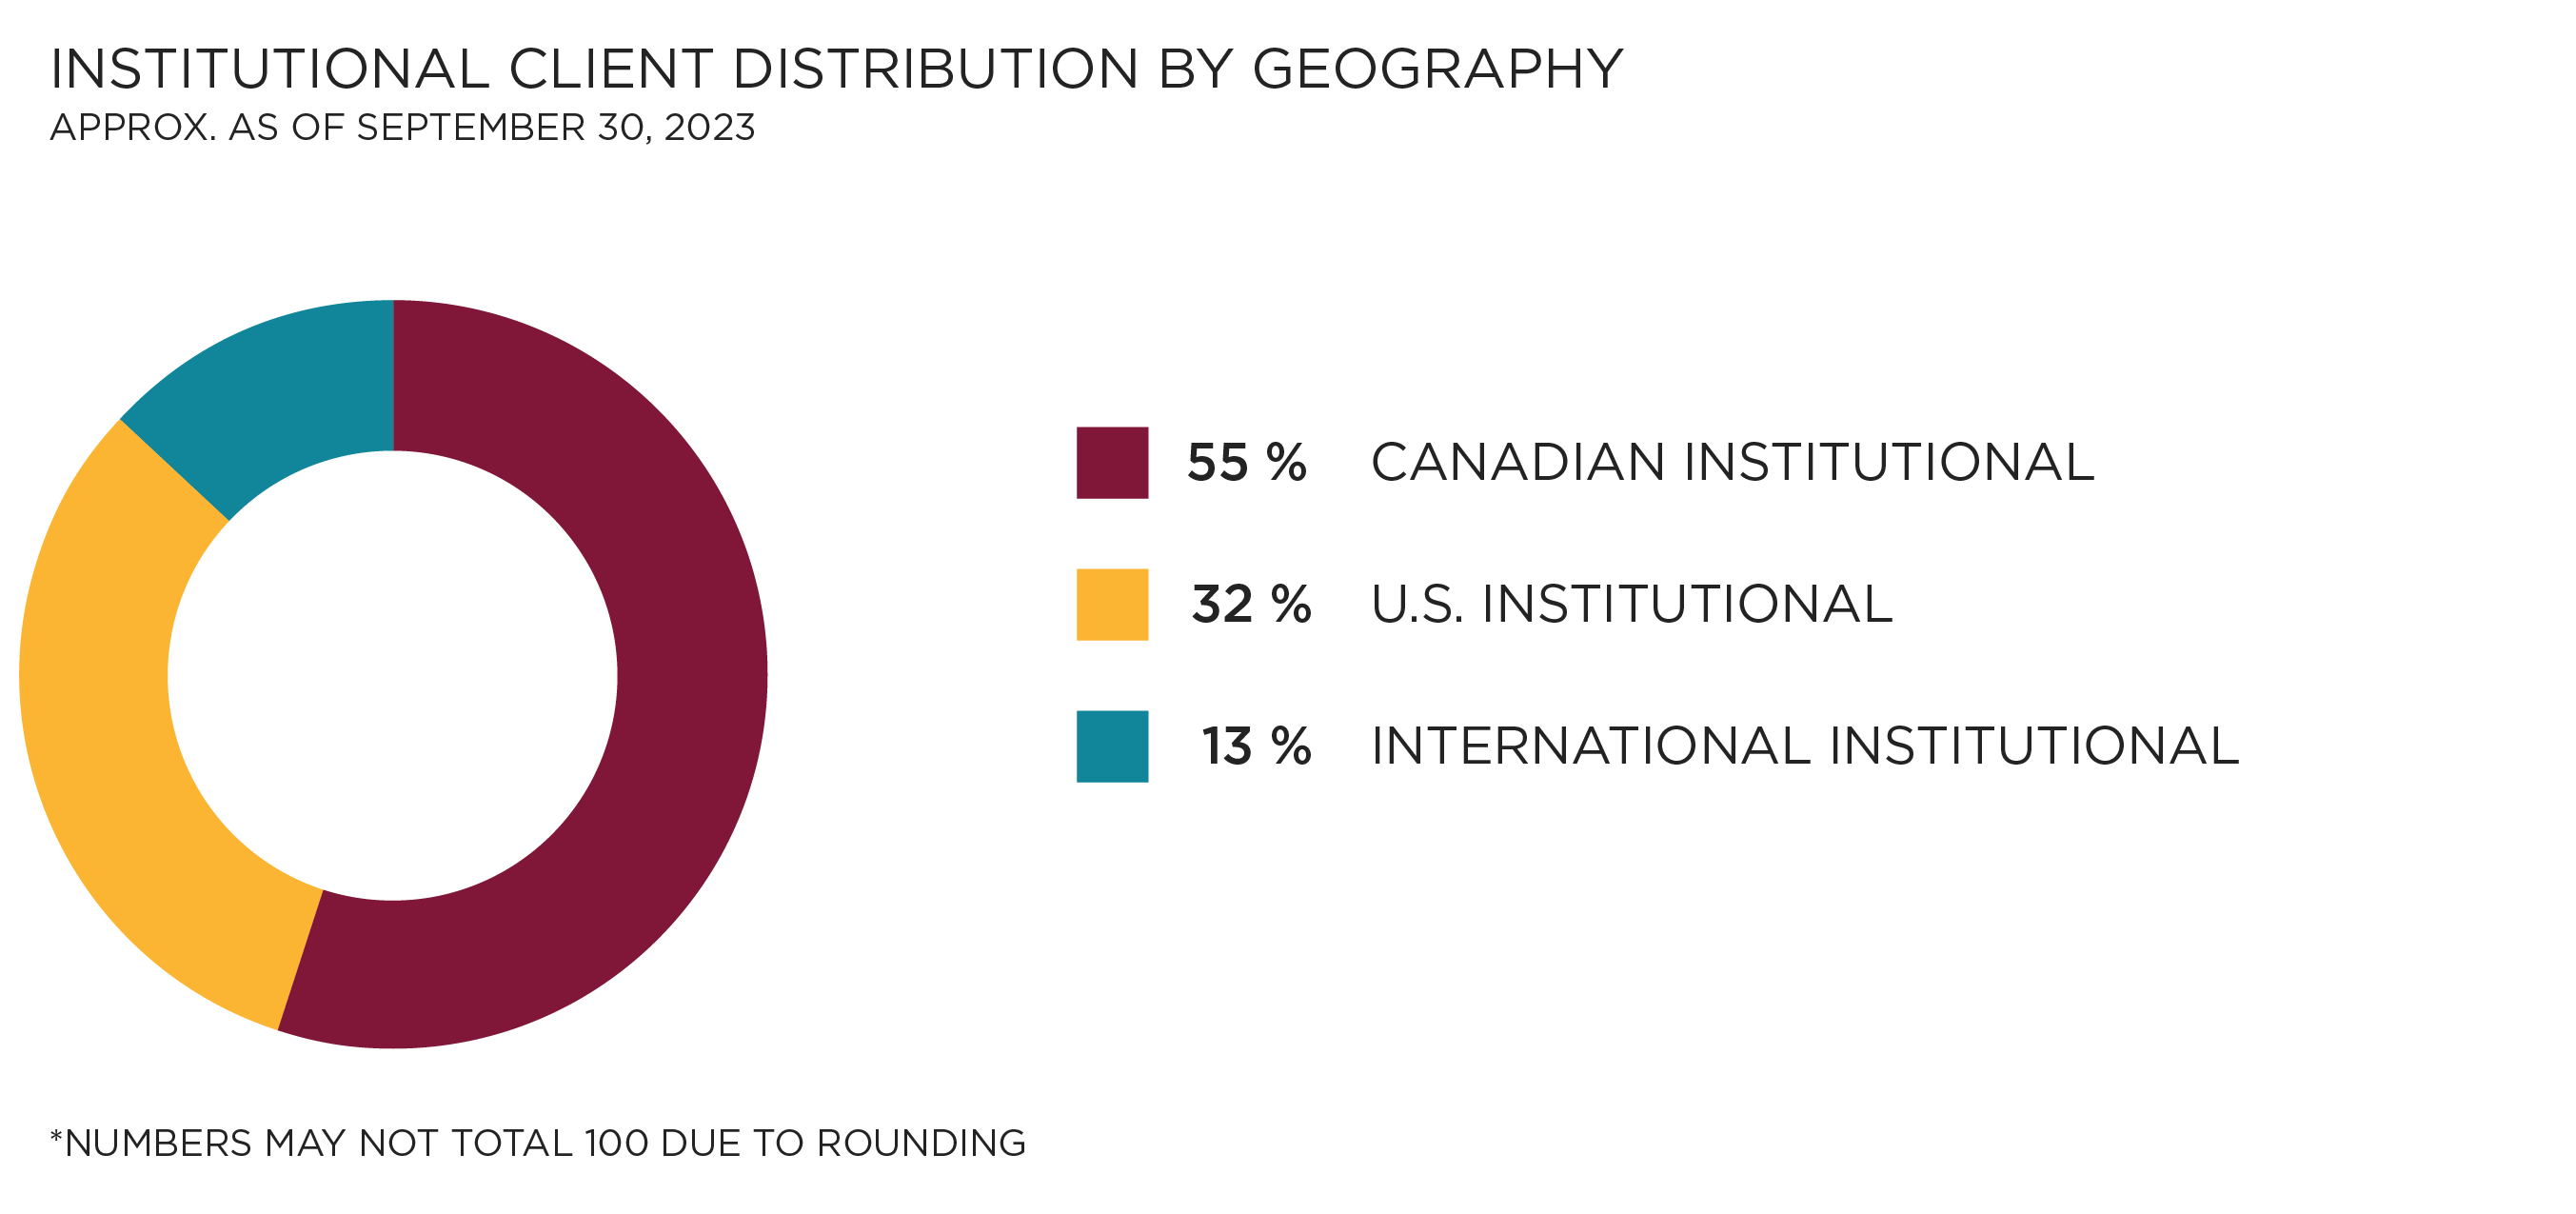 Institutional Client Distribution by Geography